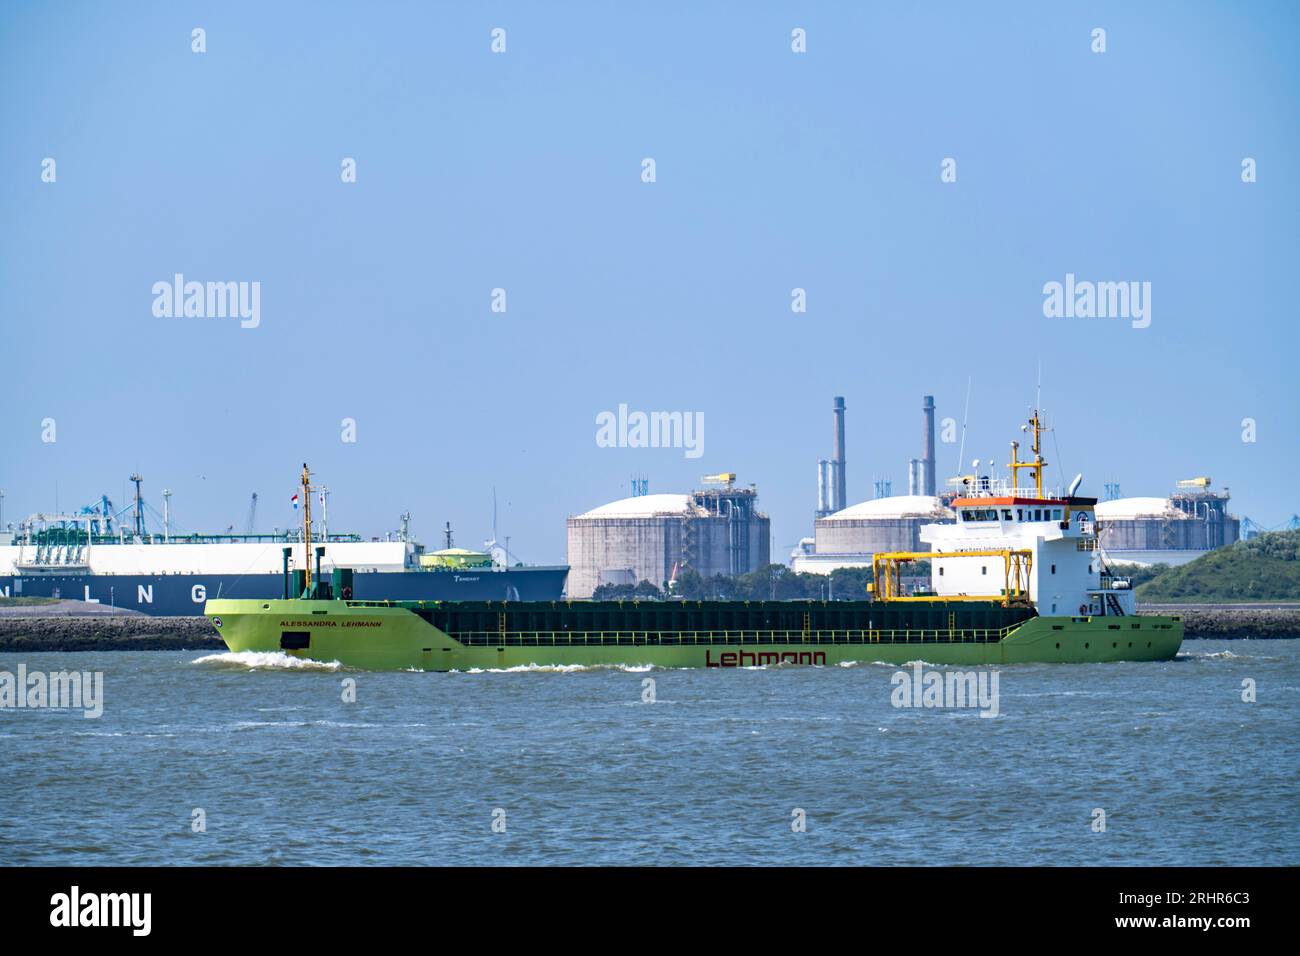 LNG import terminal Tanks for liquid natural gas in the seaport of Rotterdam, freighter Alessandra Lehmann, Maasvlakte, Rotterdam Netherlands, Stock Photo